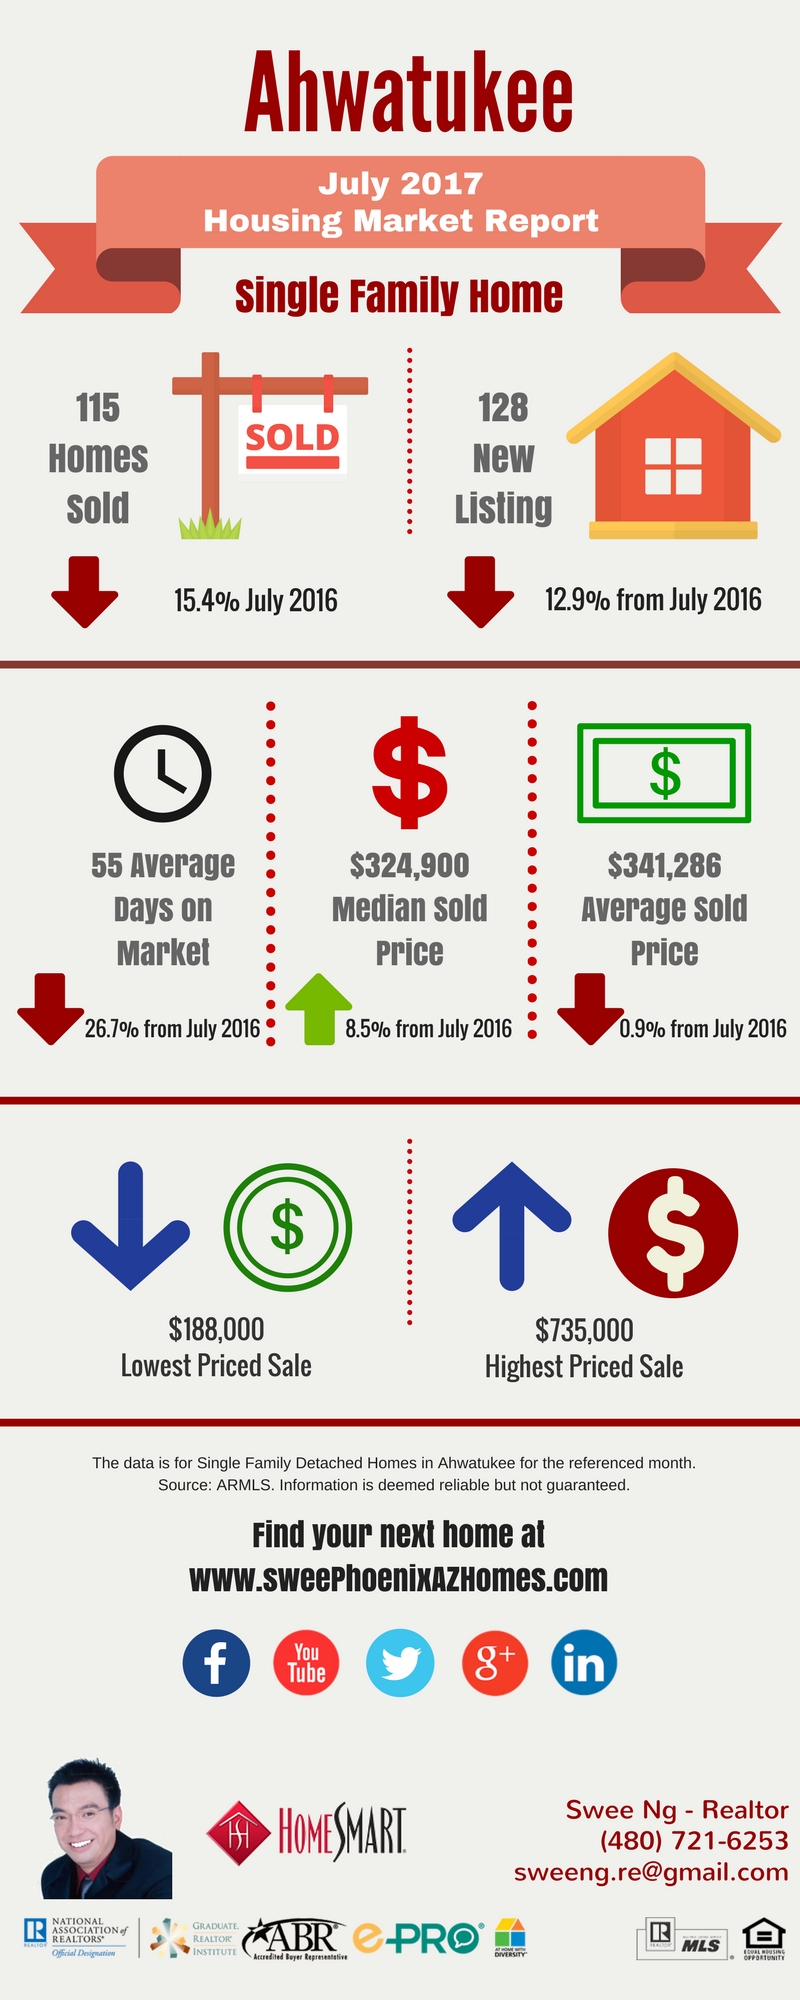 Ahwatukee Housing Market Trends Report July 2017, House Value, Real Estate and Statistic by Swee Ng